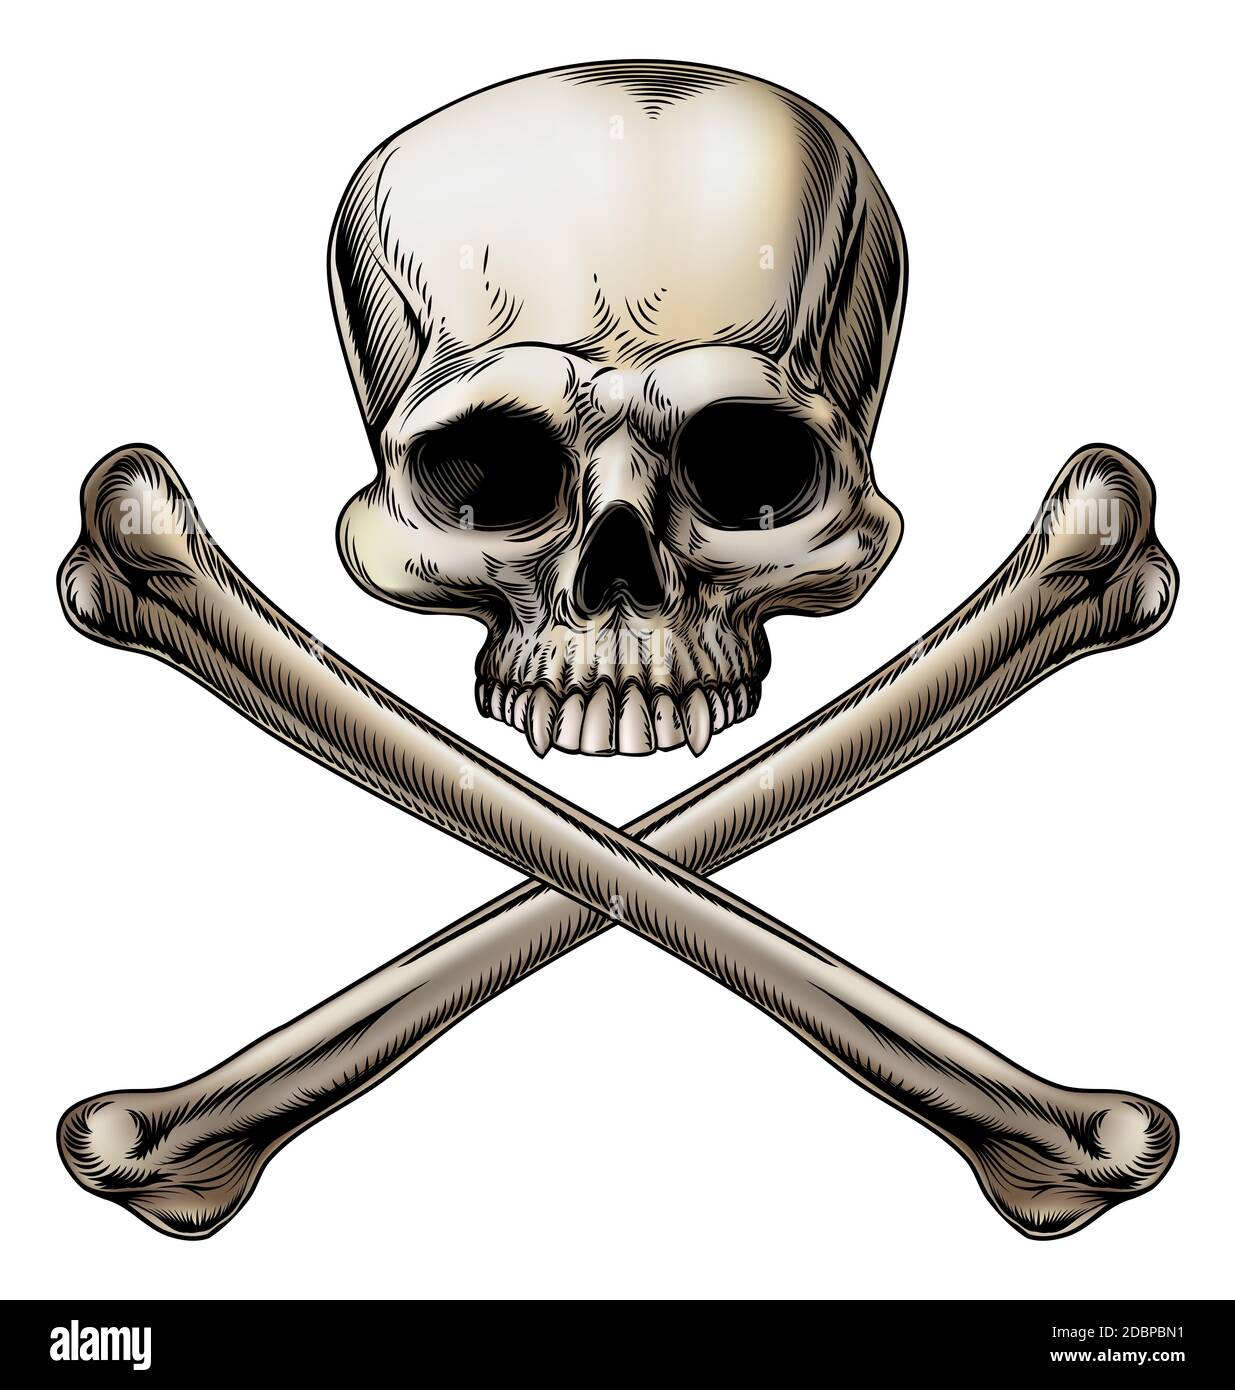 Jolly roger illustration of a skull above a pair of crossed bones Stock Photo